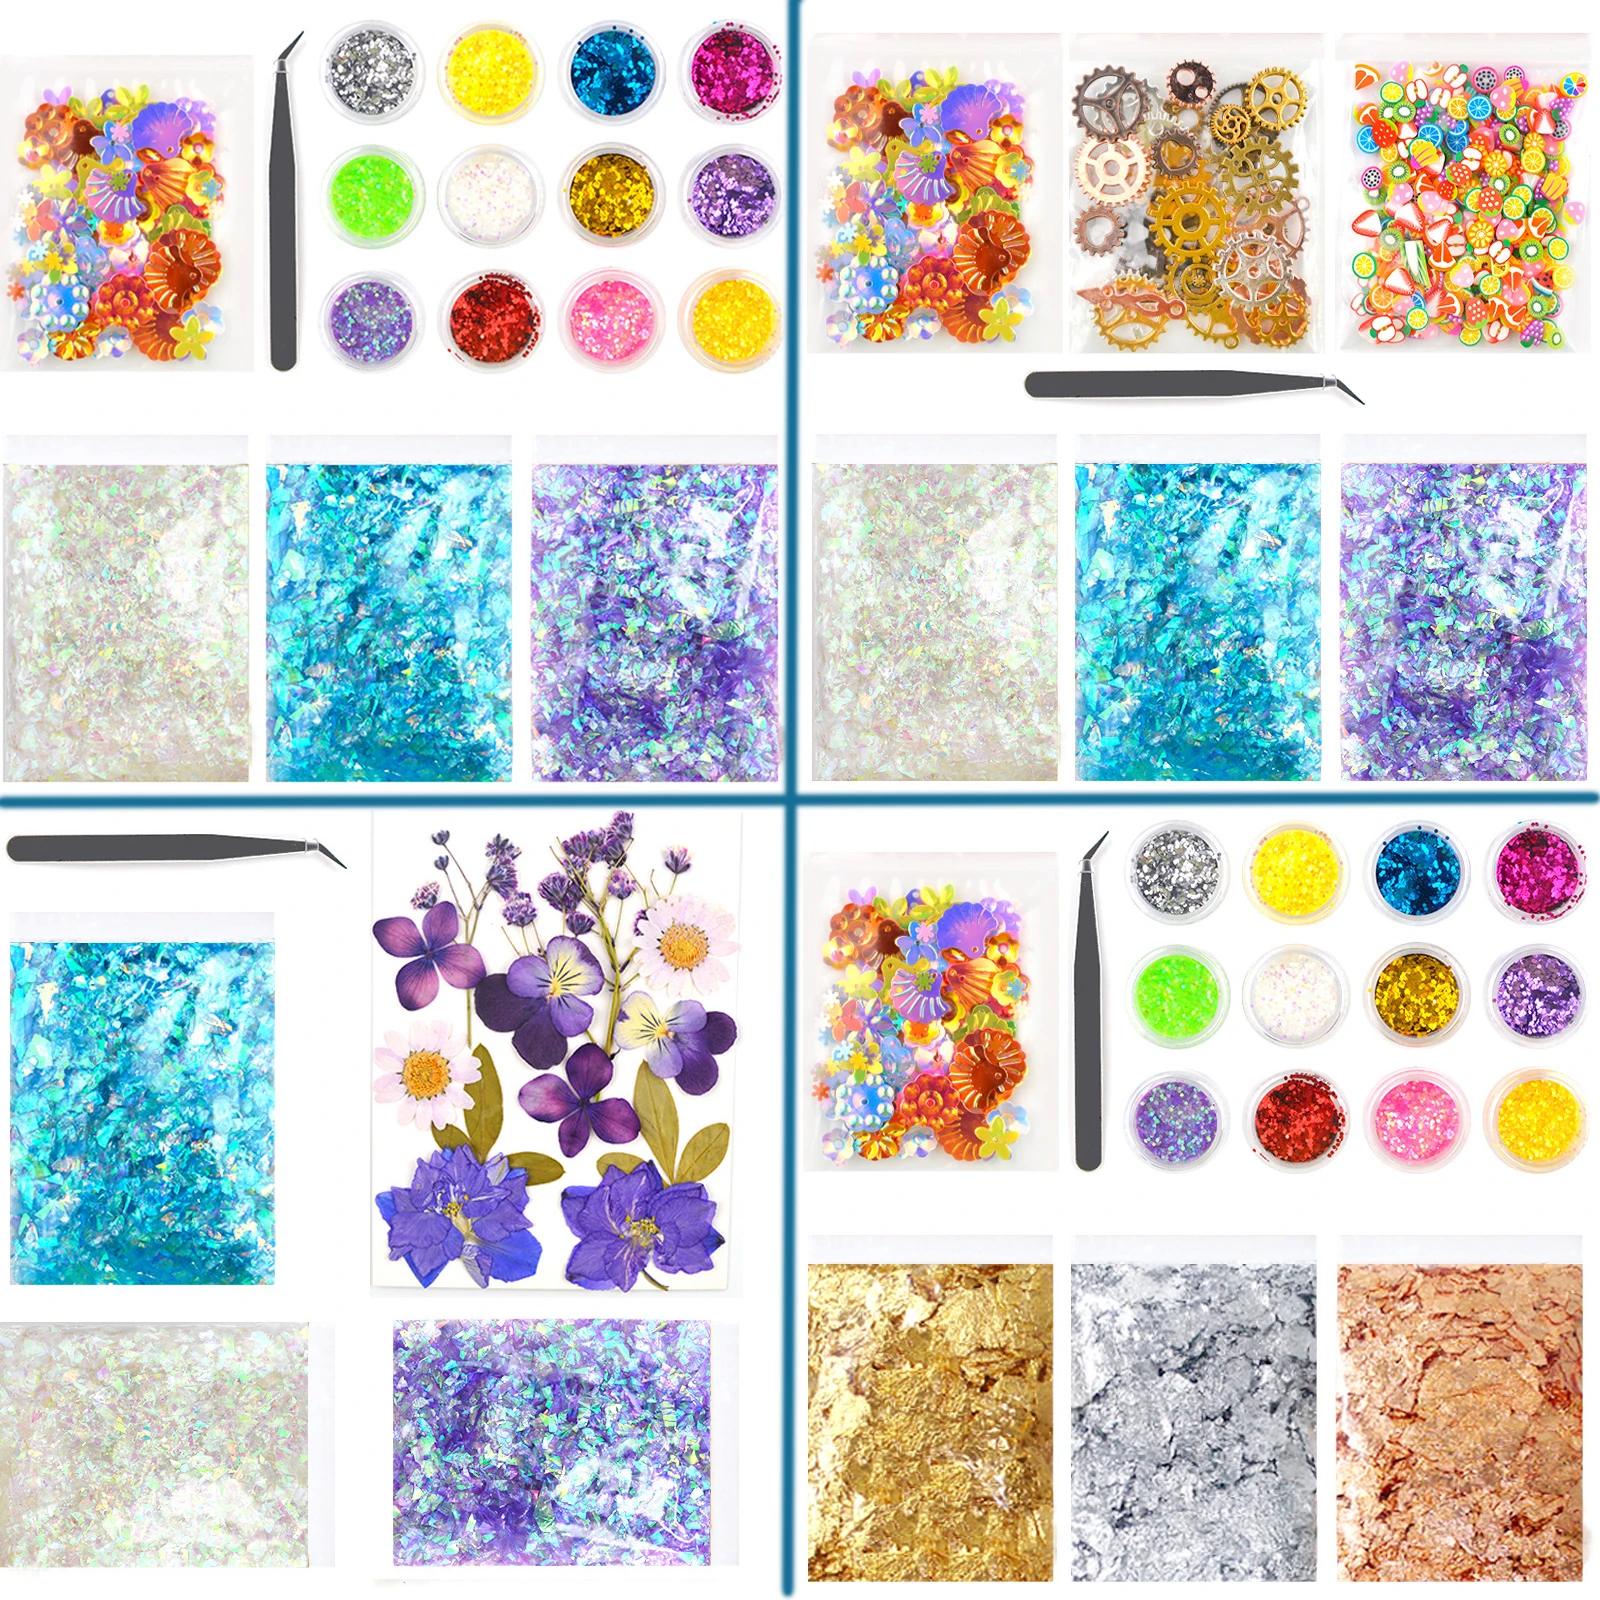 

1Set Mixed Resin Jewelry Craft Filling Material Sequins Multicolor Beauty Nail Art Decals Resin Epoxy Mold DIY Making Jewelry